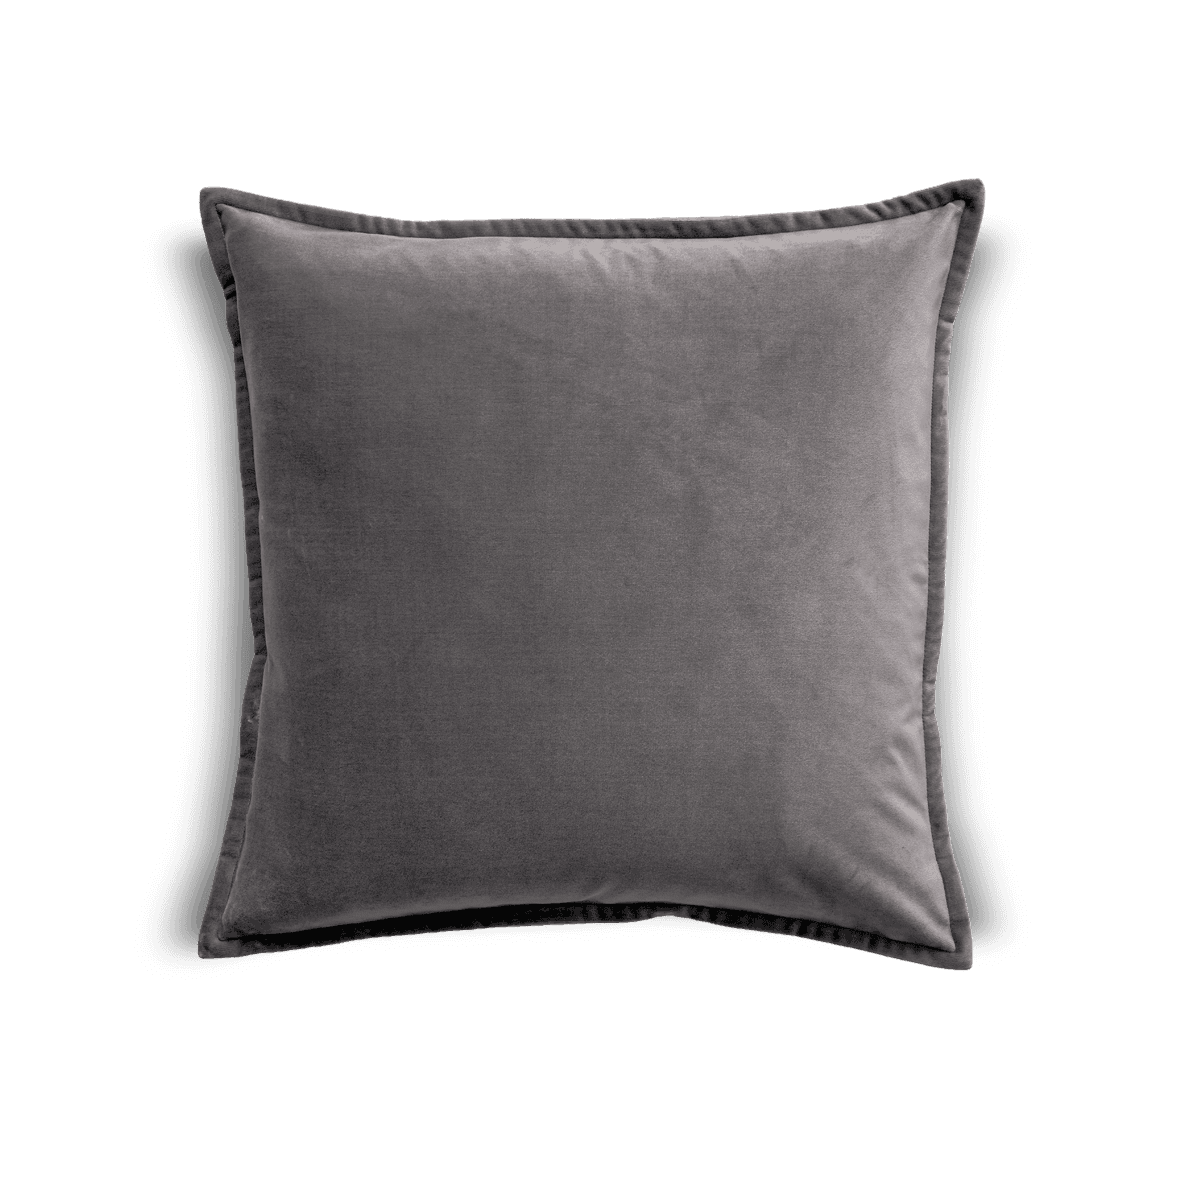 Cushion Alessandra Laurent With Filler,Gray